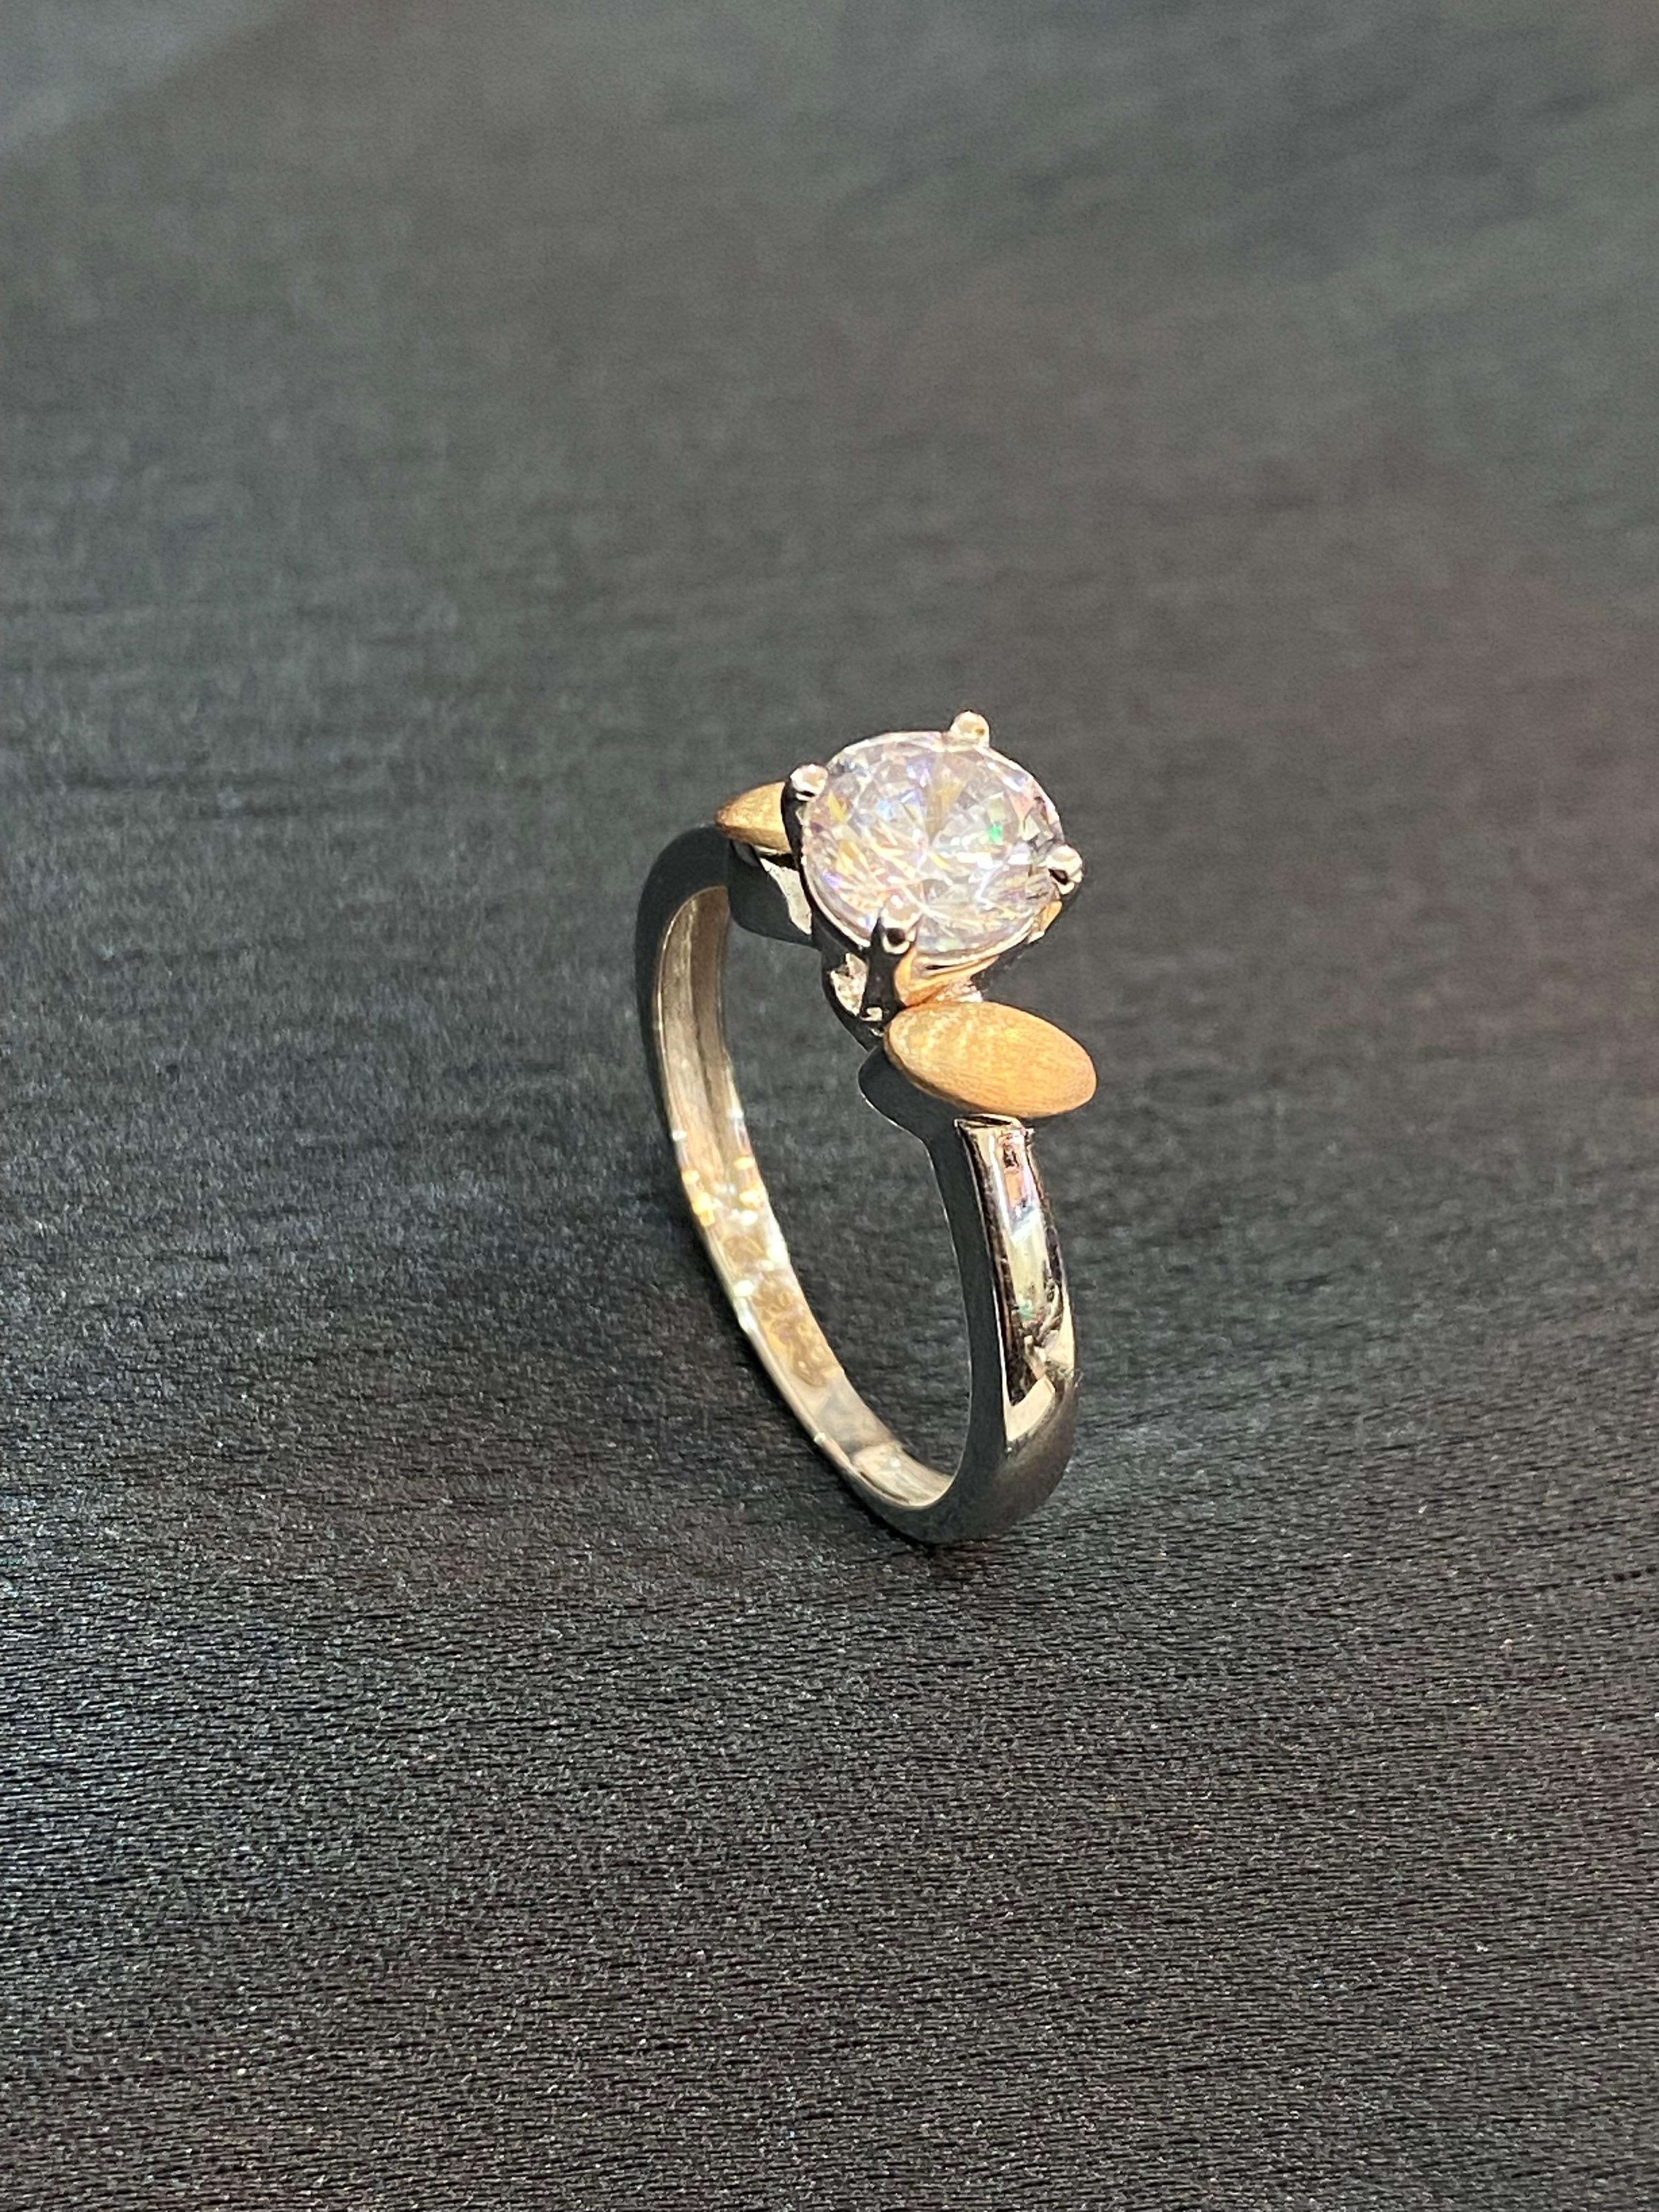 This stunning 18K White Gold Ring adds a touch of brilliance to traditional attire, boasting GIA Certified 1.50 Carats of dazzling diamonds for an exquisite sparkle!

Specifications : 
Diamond Color : White
Diamond Weight : 1.50 Carats
Diamond Shape